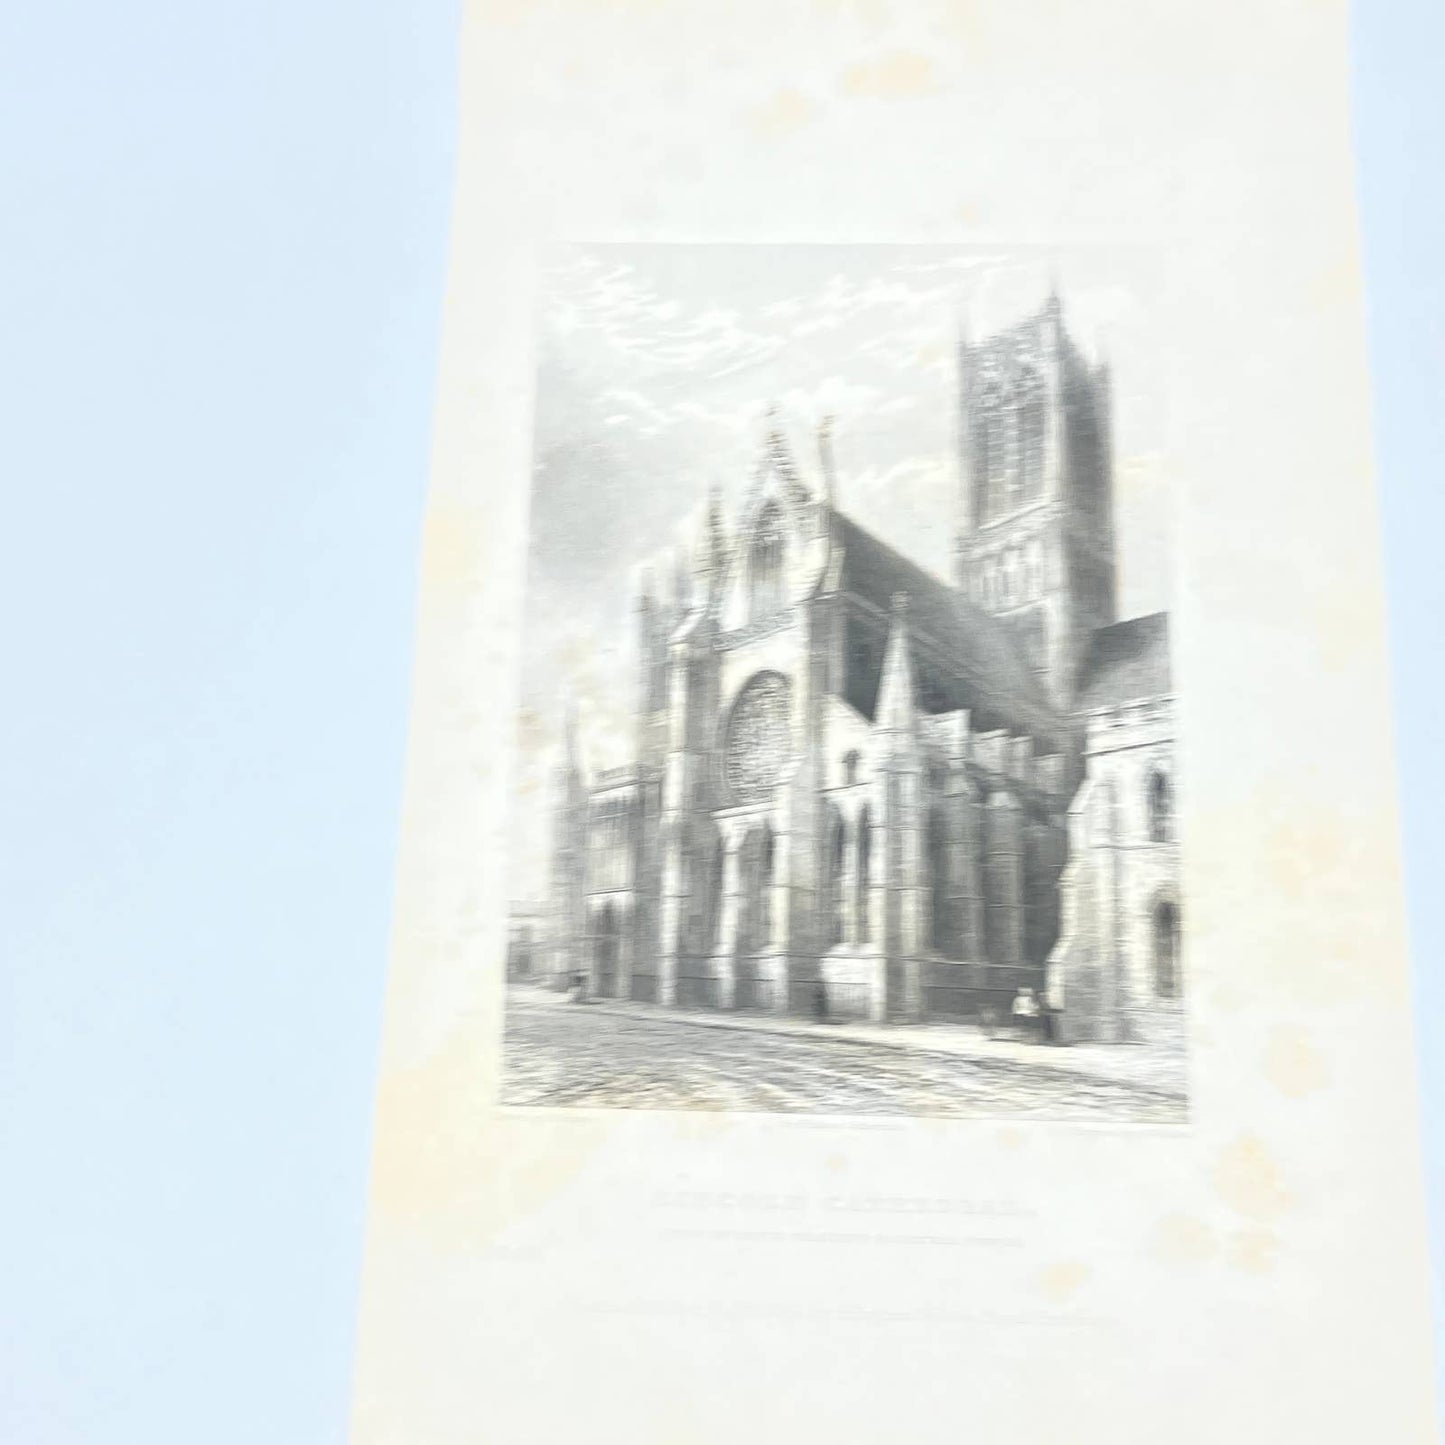 1838 Original Art Lot of 4 Engraving Lincoln Cathedral and Title Page TG6